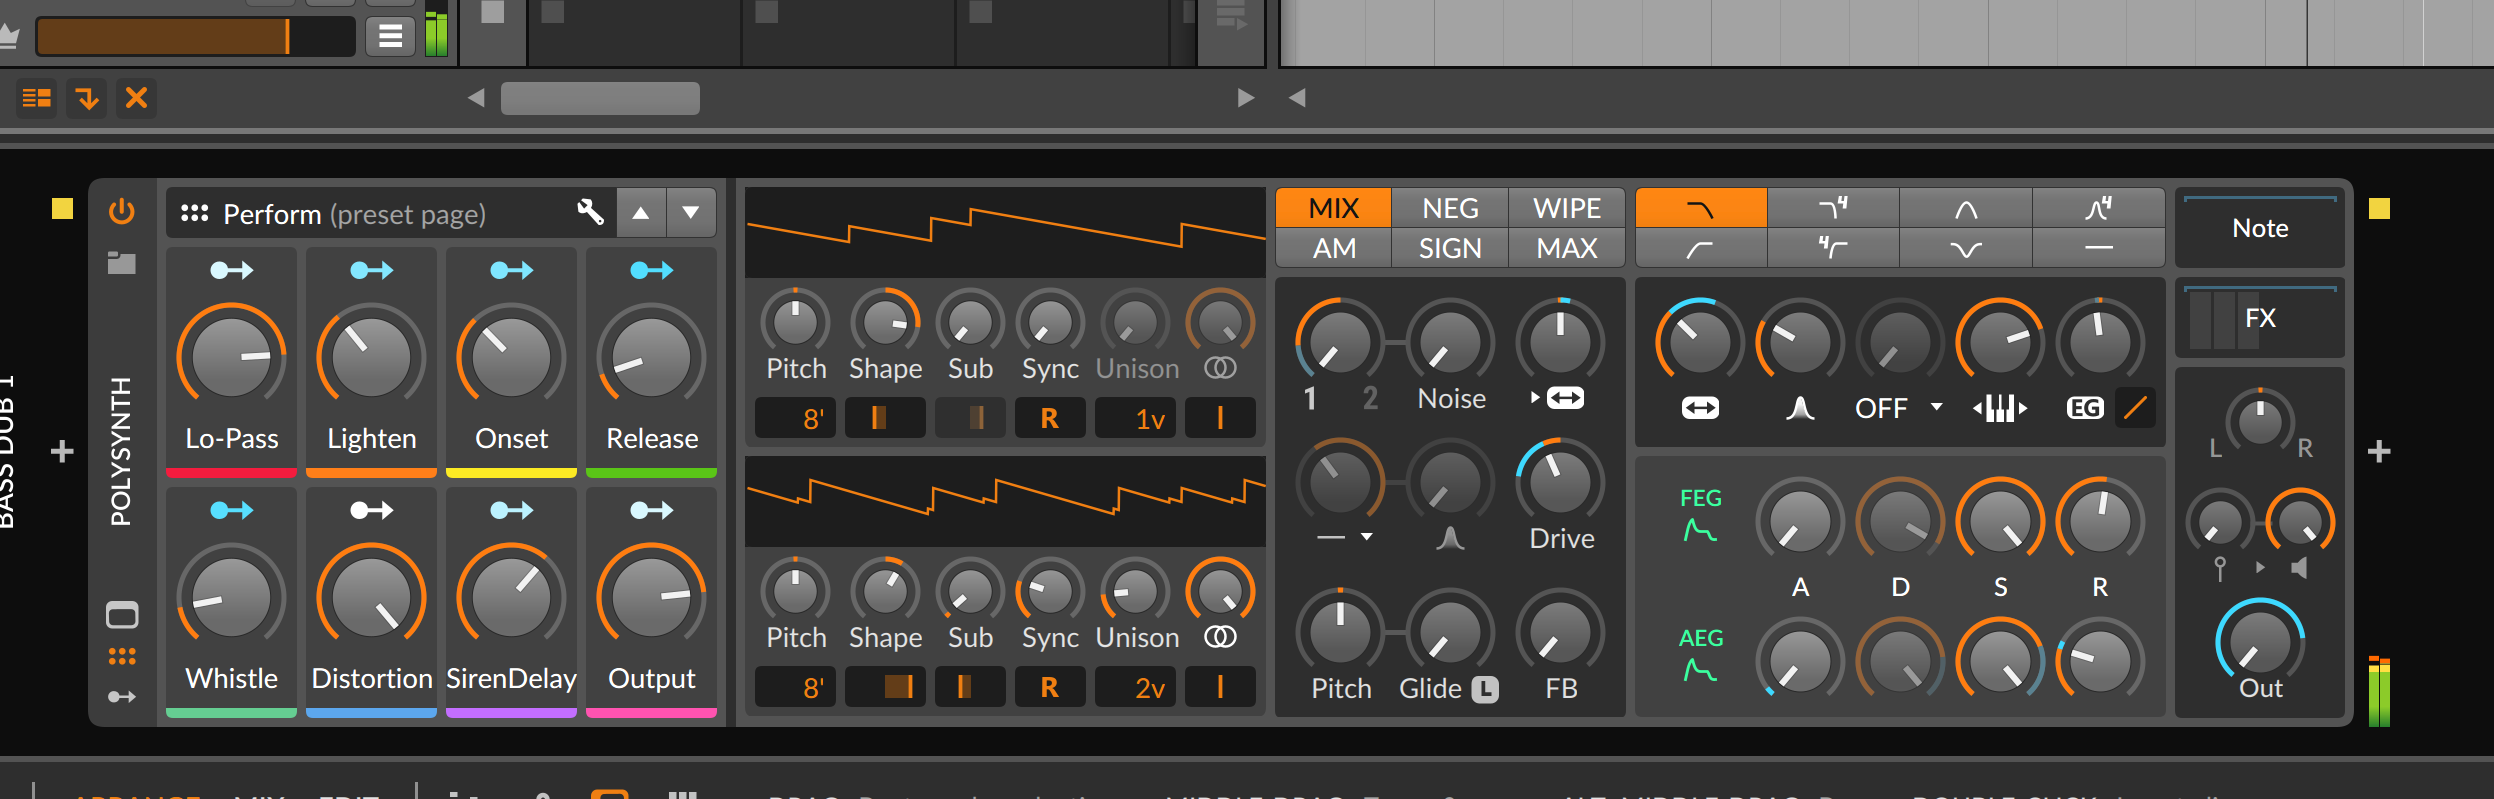 Bitwig Studio (upgrade From Producer) - Sequencer sofware - Variation 3